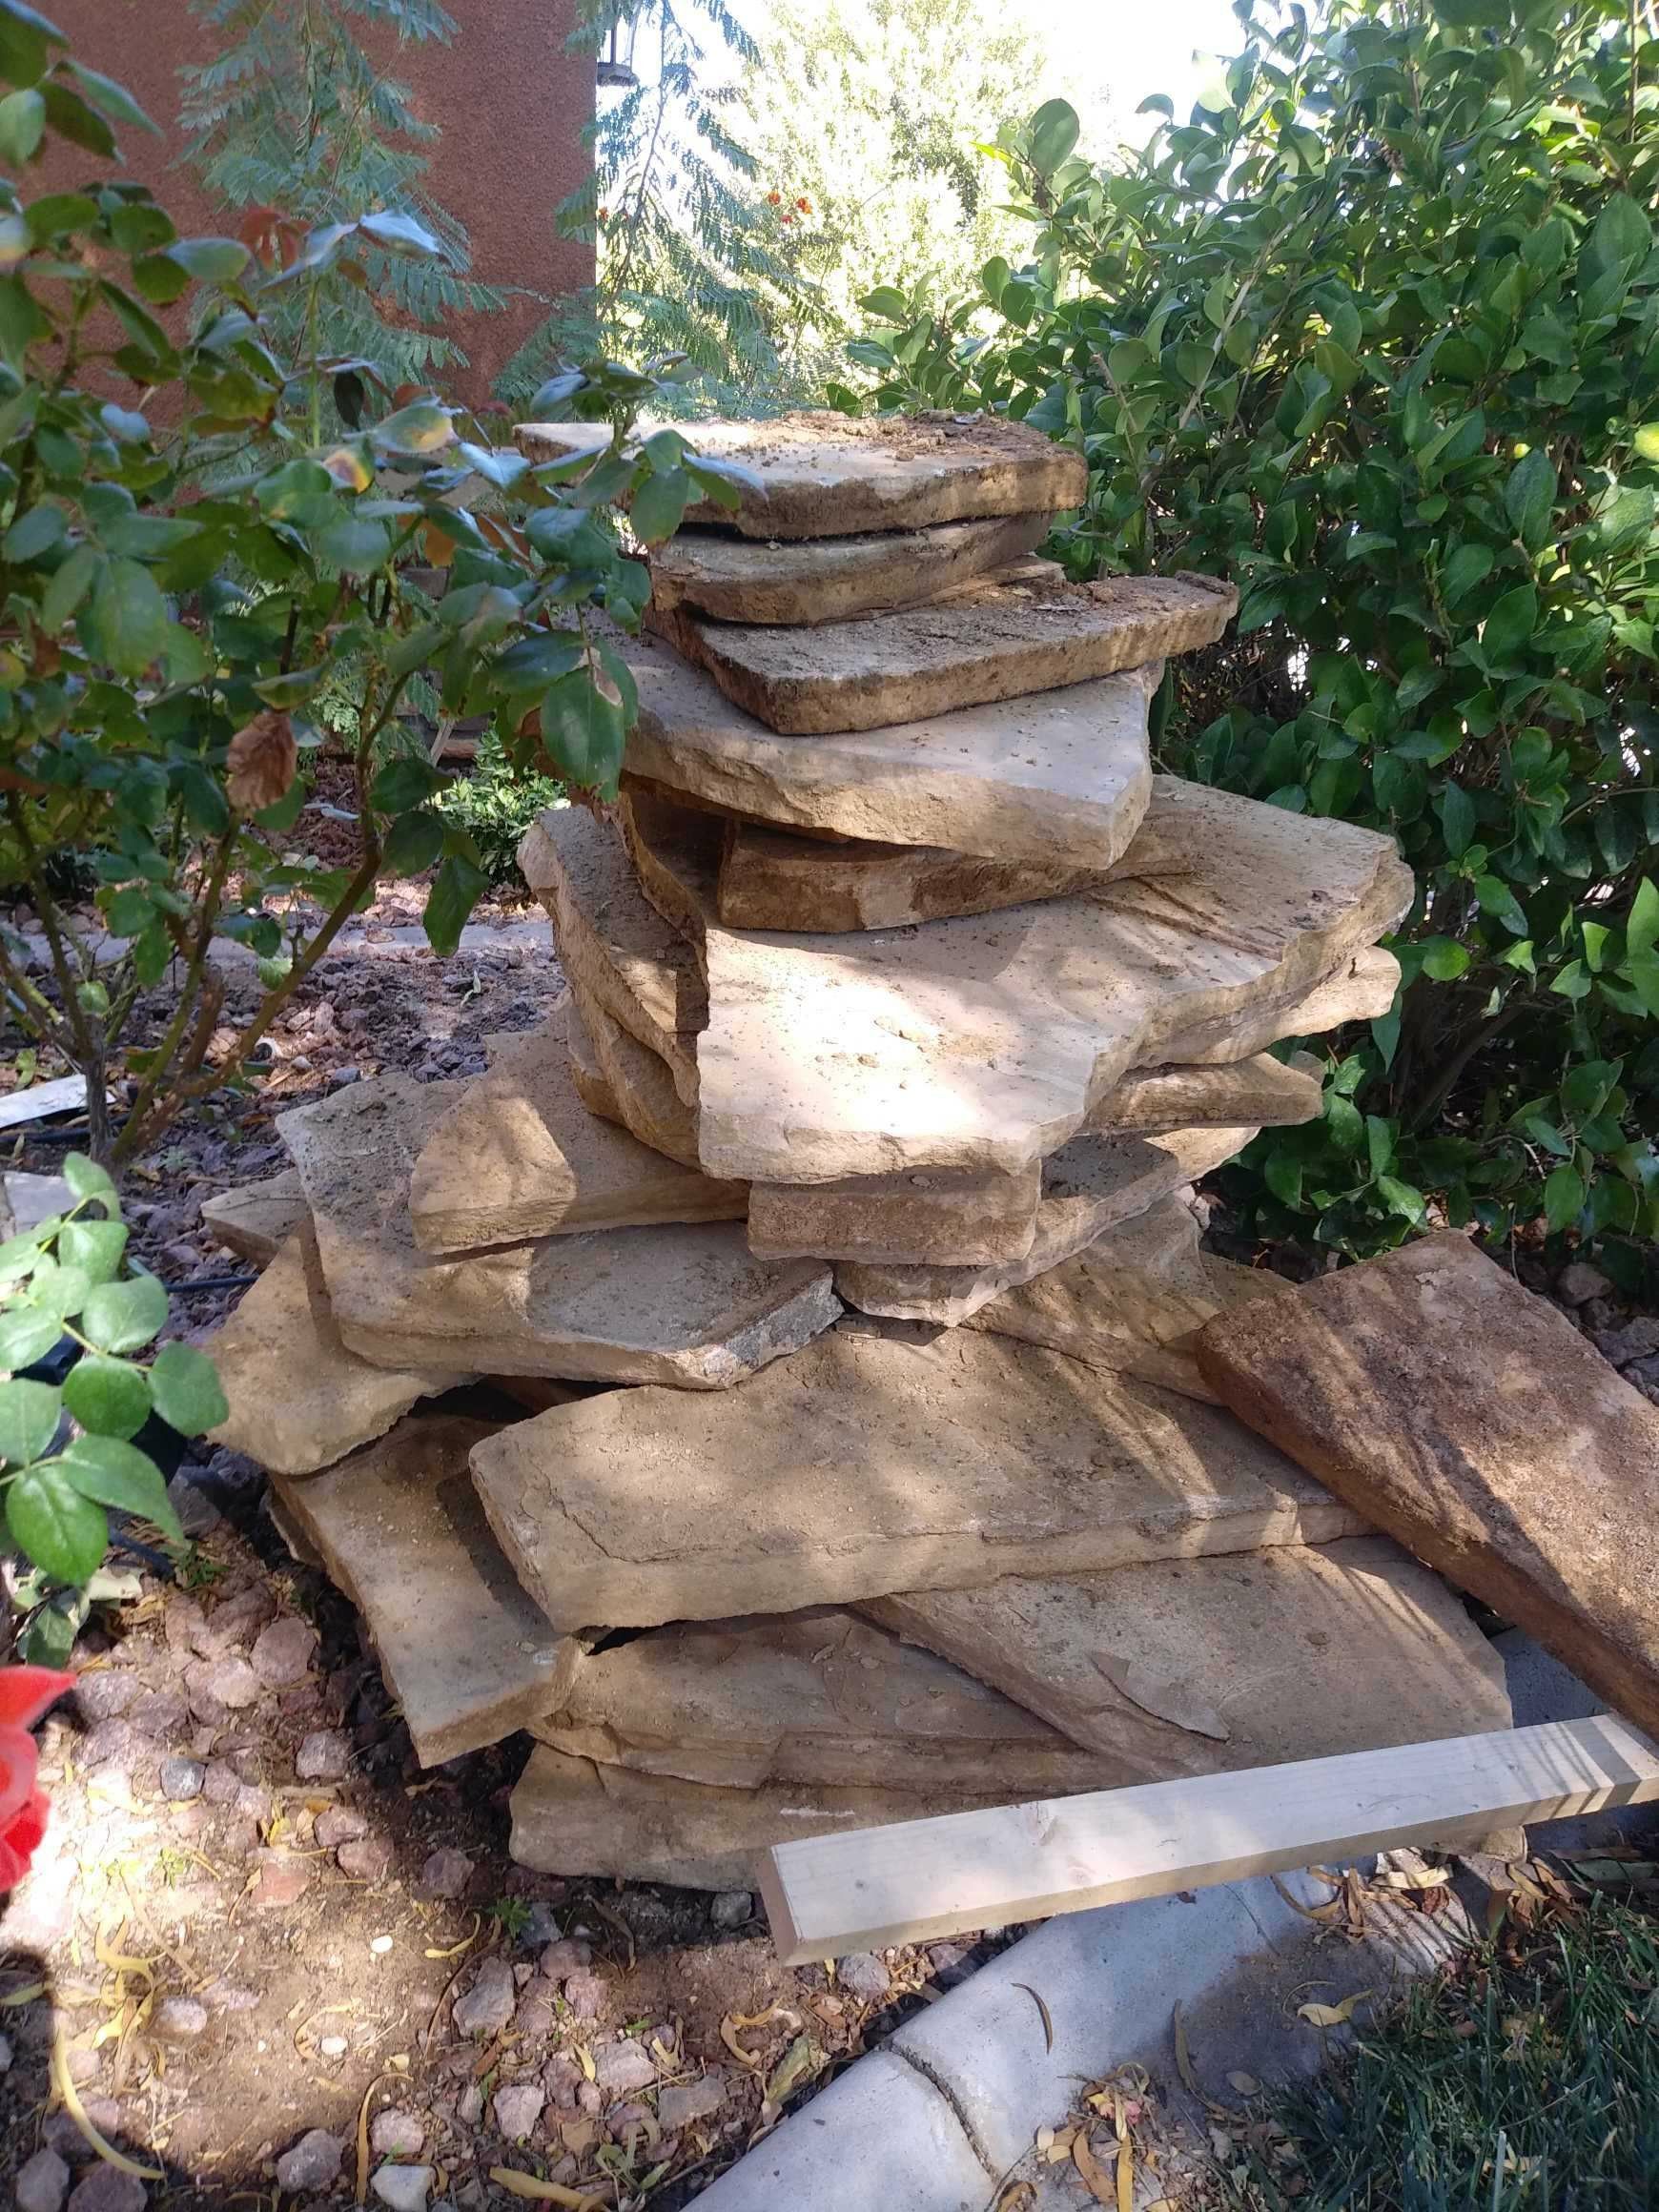 FREE Sandstone - pick up must be TODAY by 4pm